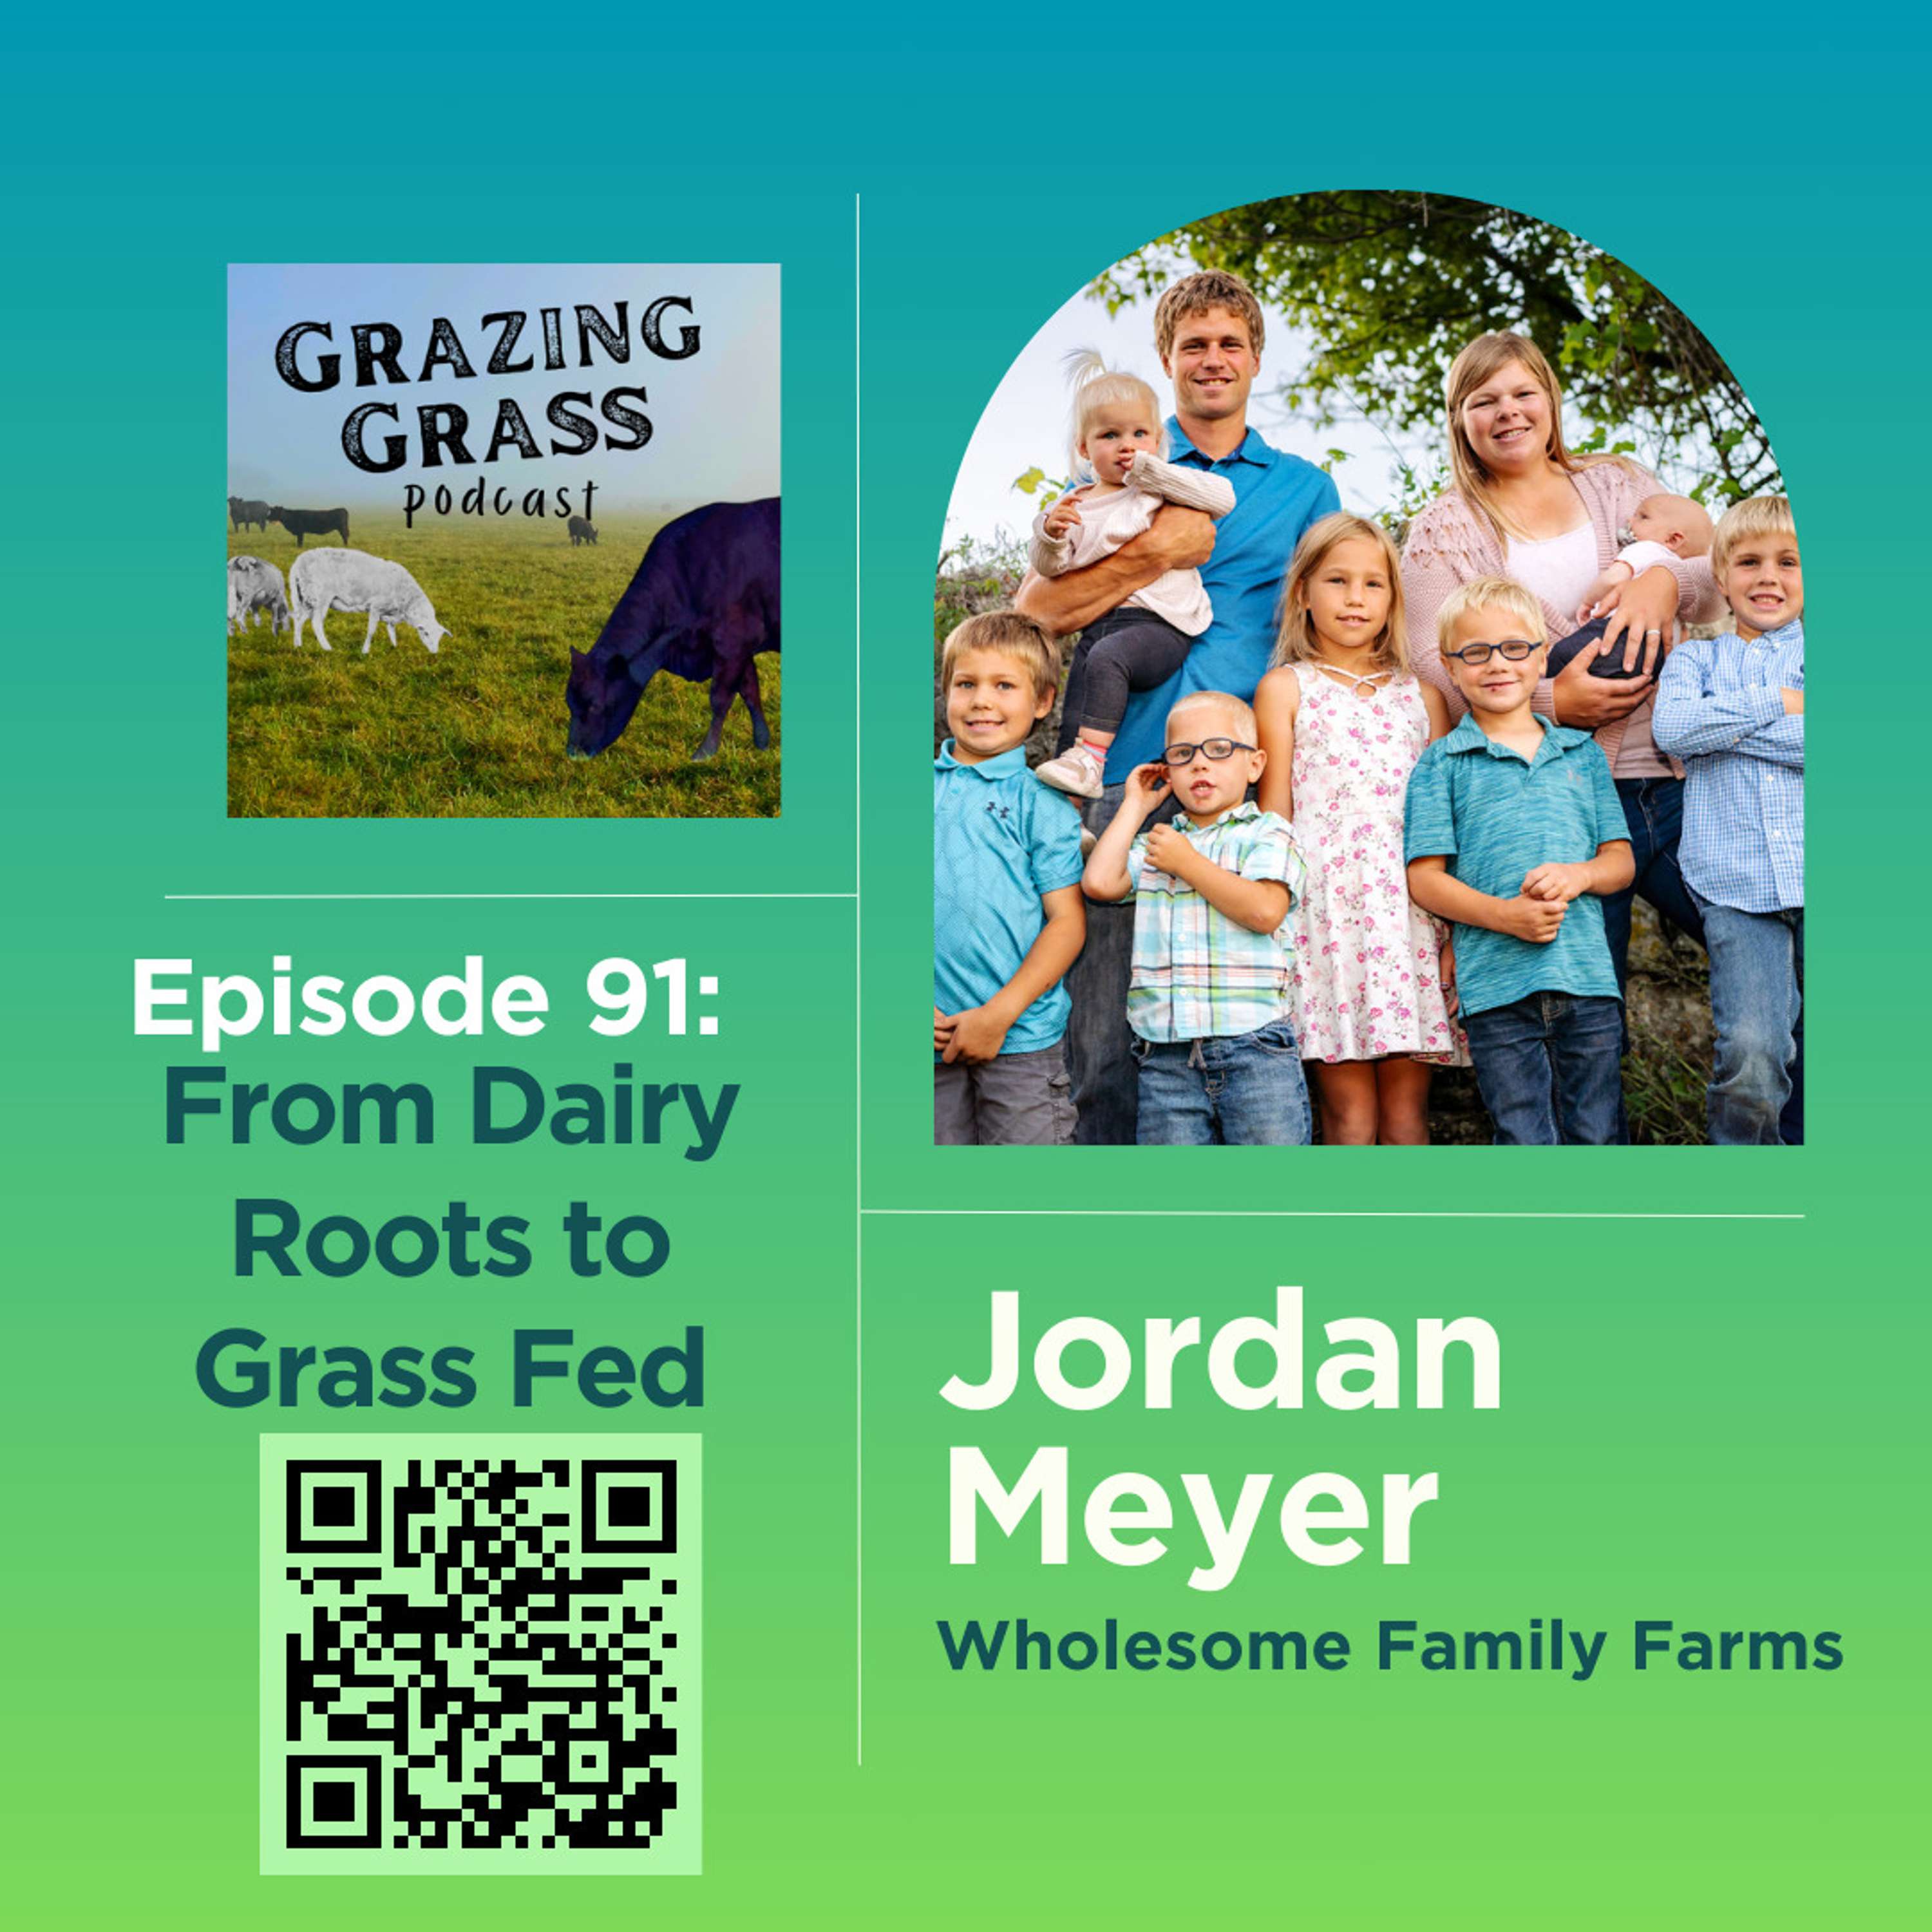 e91. From Dairy Roots to Grass Fed with Jordan Meyer